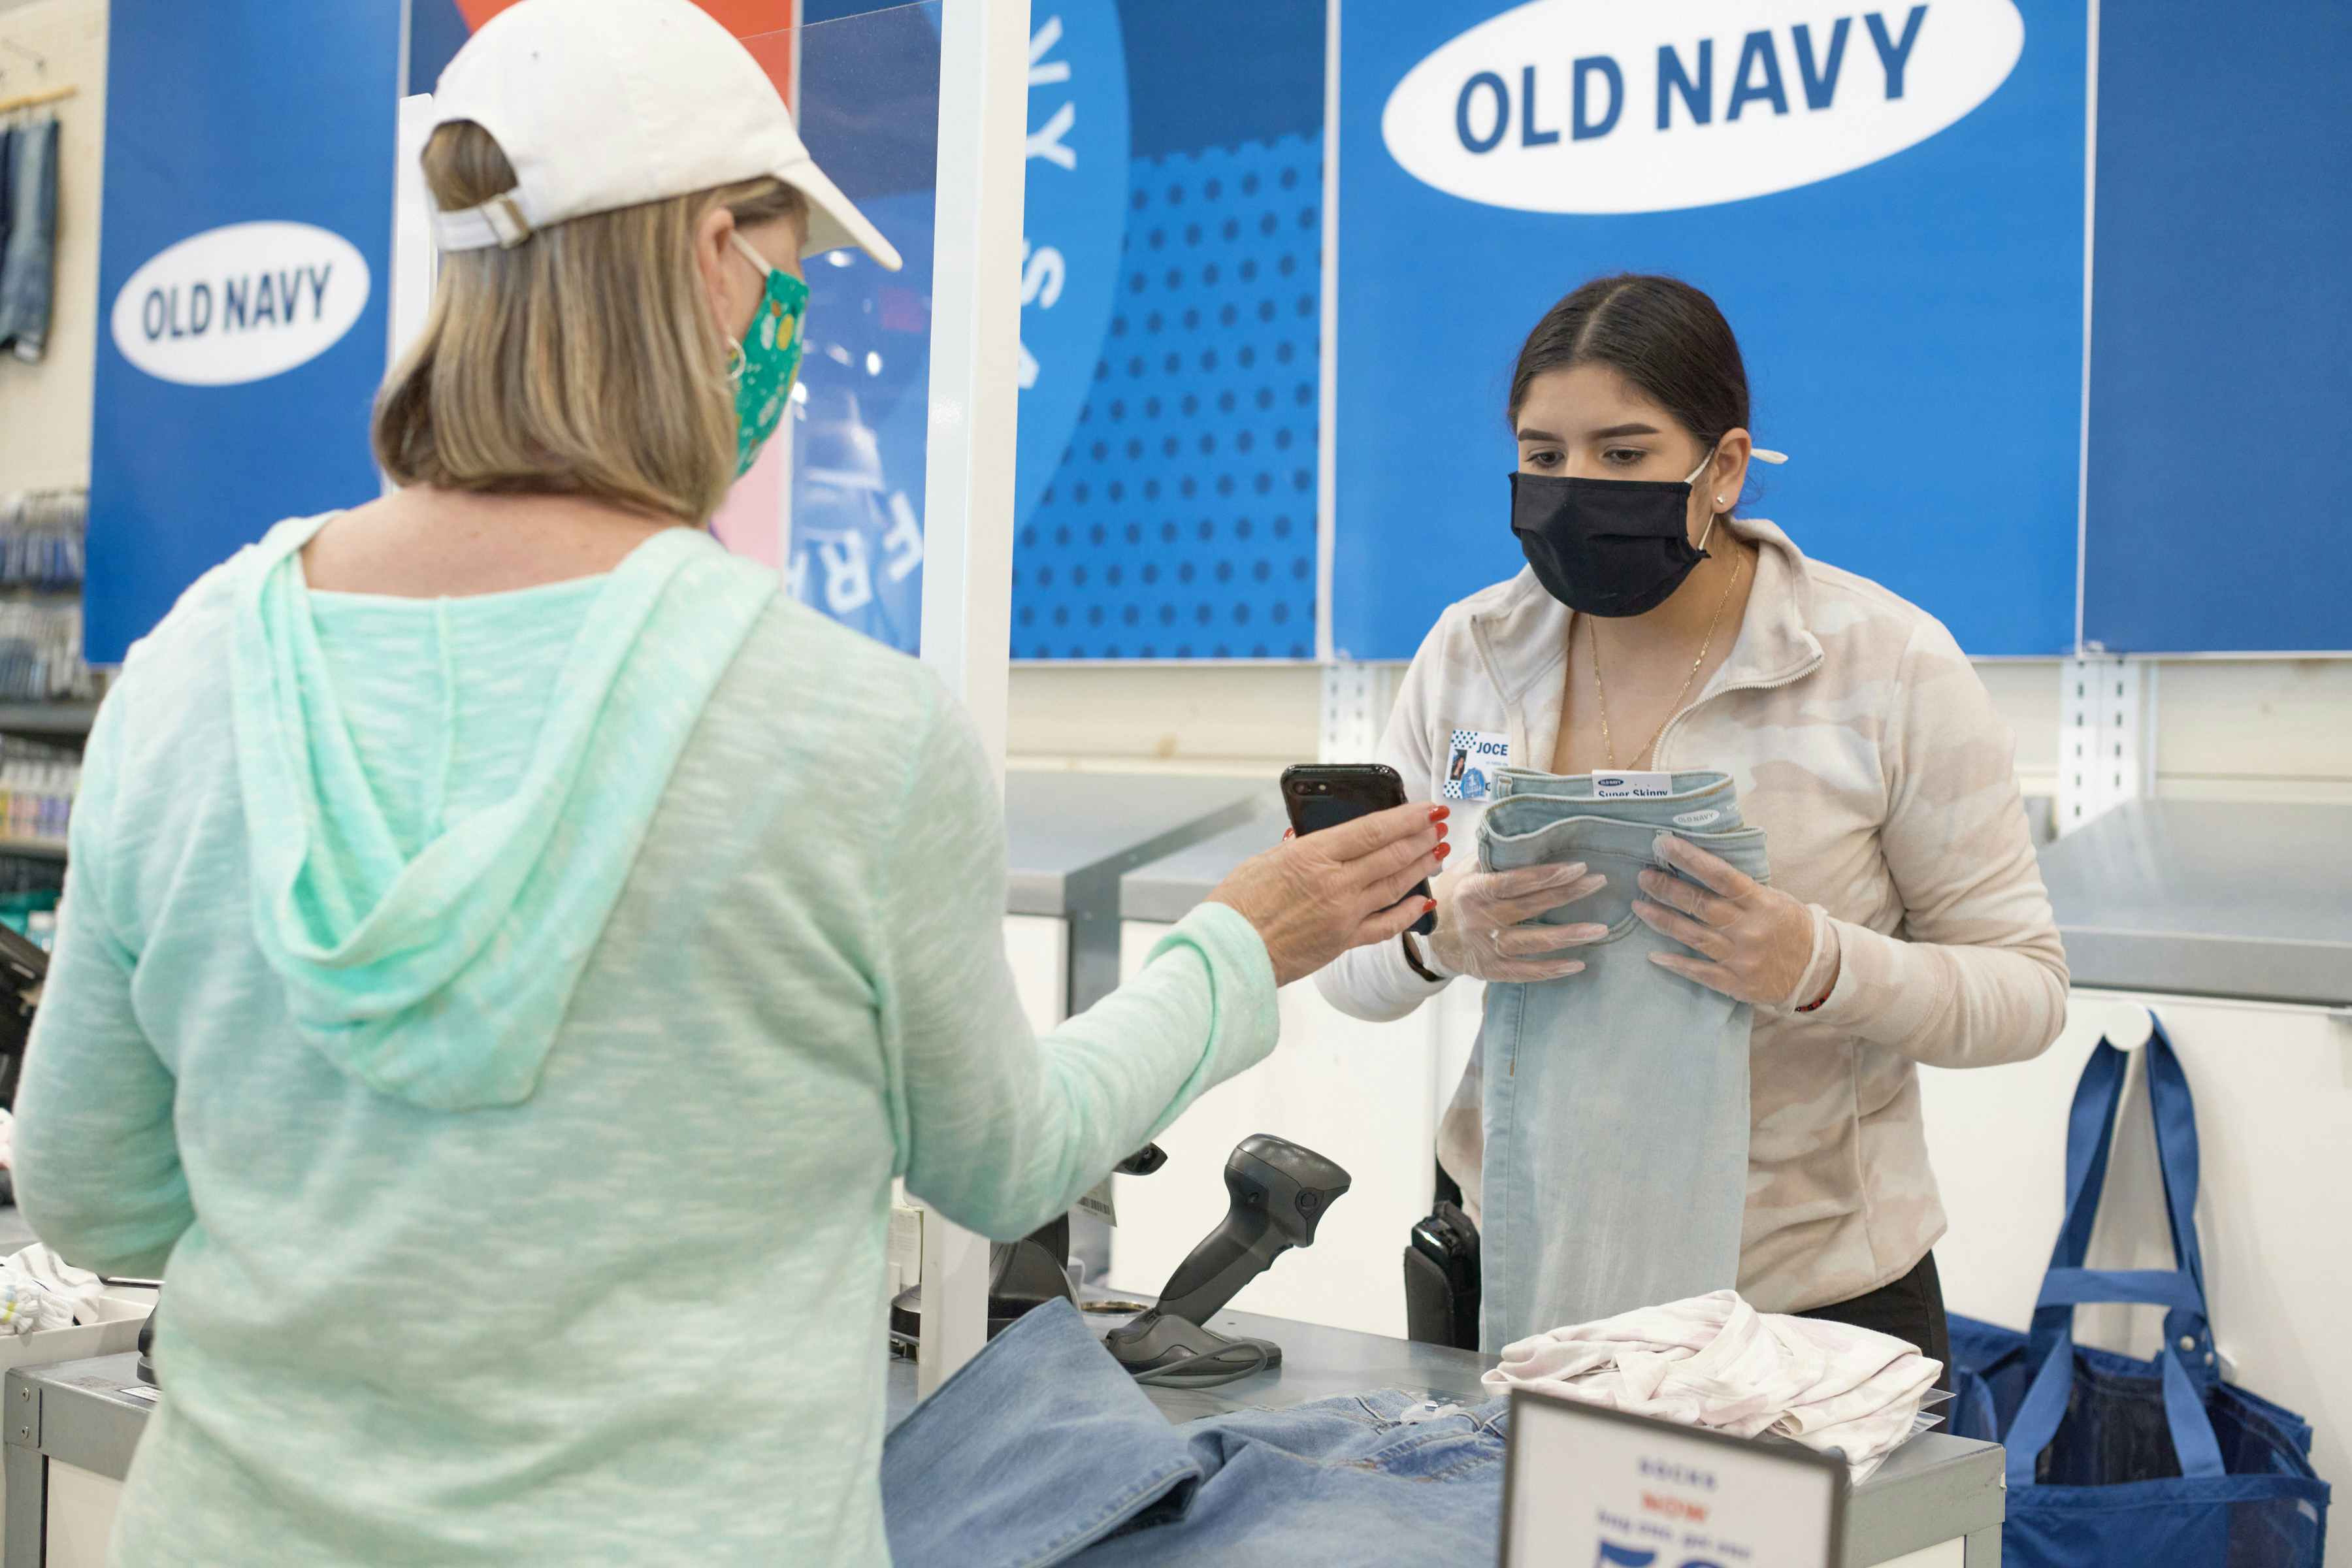 A customer showing her phone to an Old Navy employee holding some jeans at the counter.